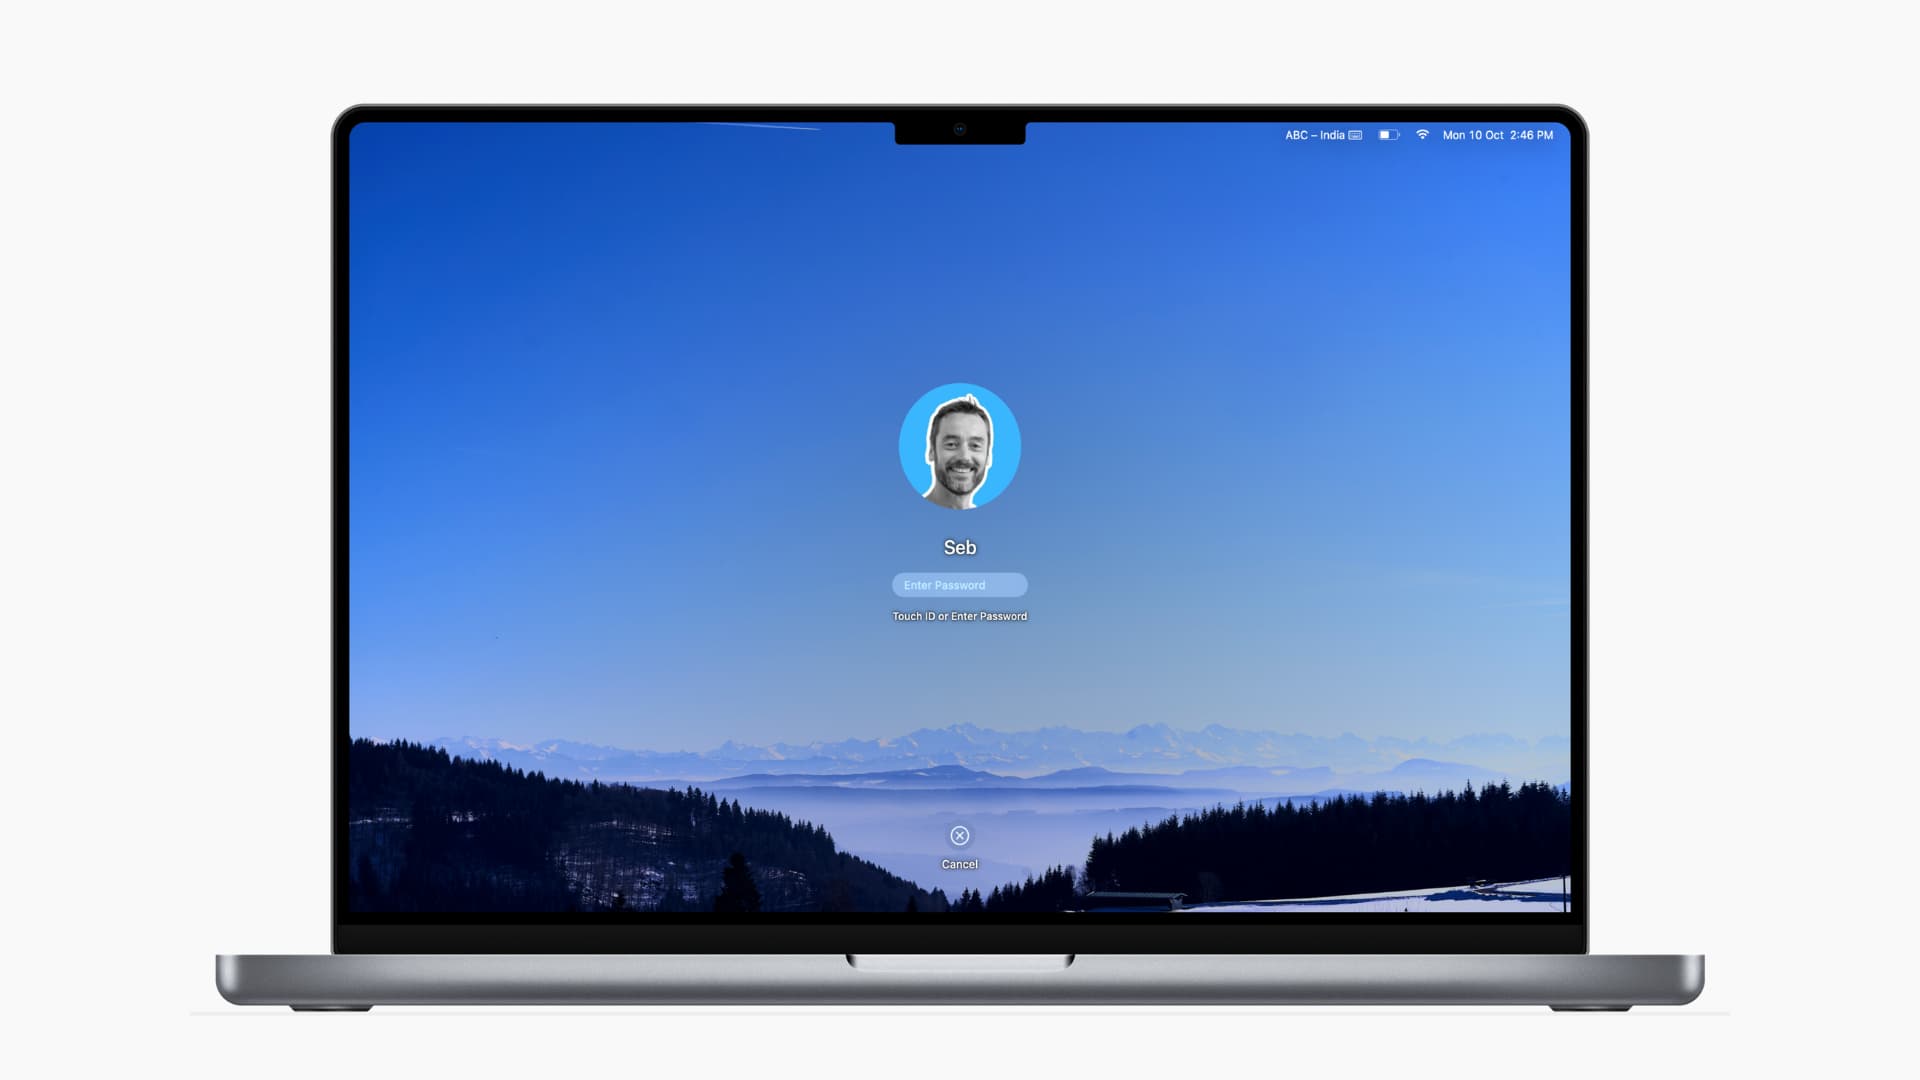 Mac Lock Screen showing the option to enter the password or use Touch ID